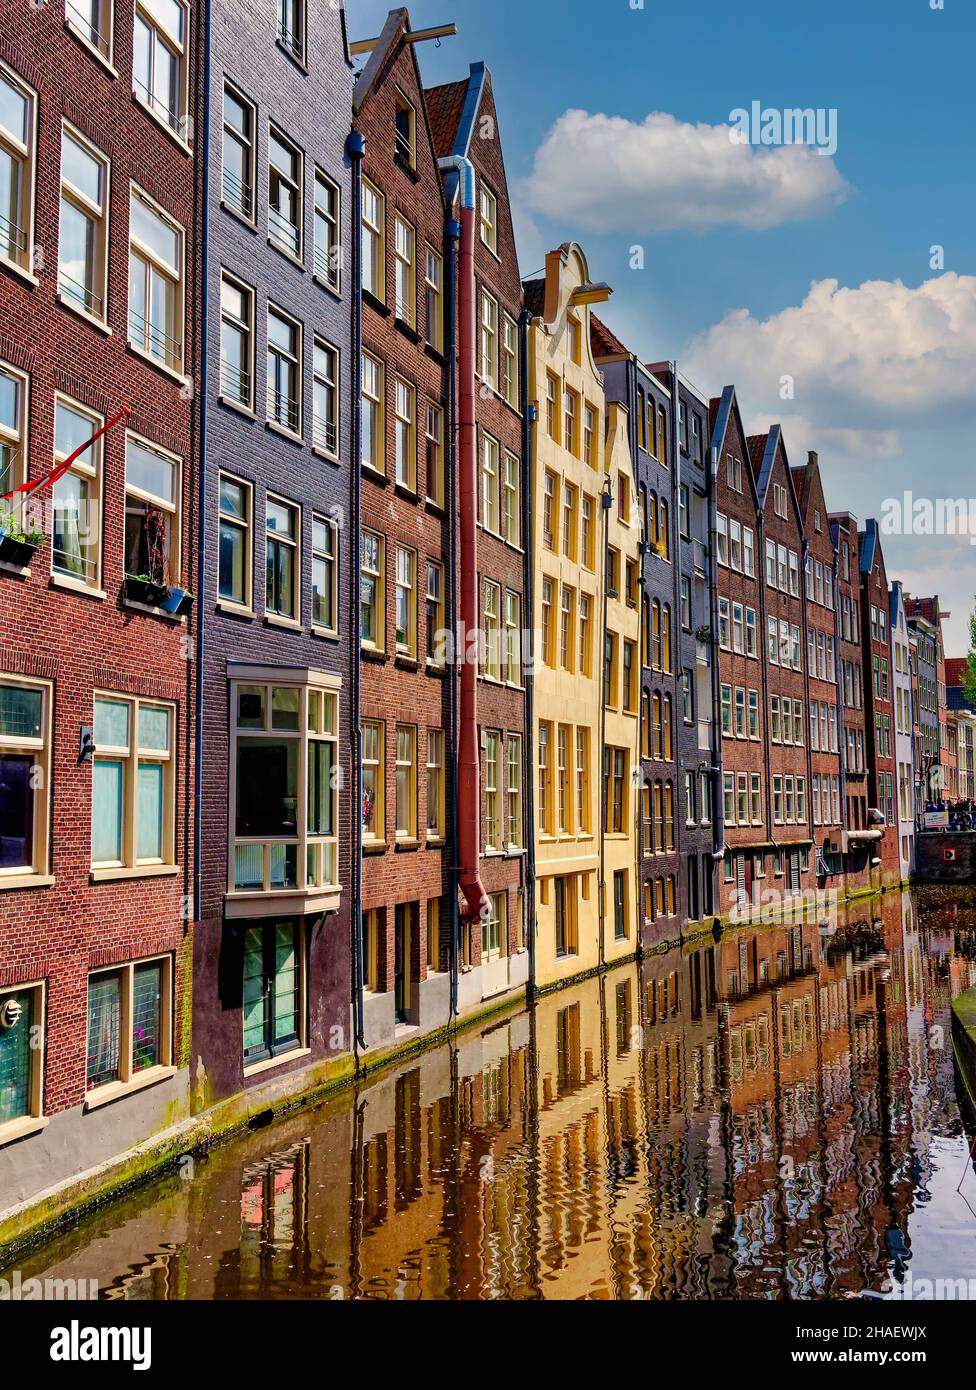 Amsterdam city, historical houses in the Old town center reflecting in canal, Holland, Netherlands Stock Photo